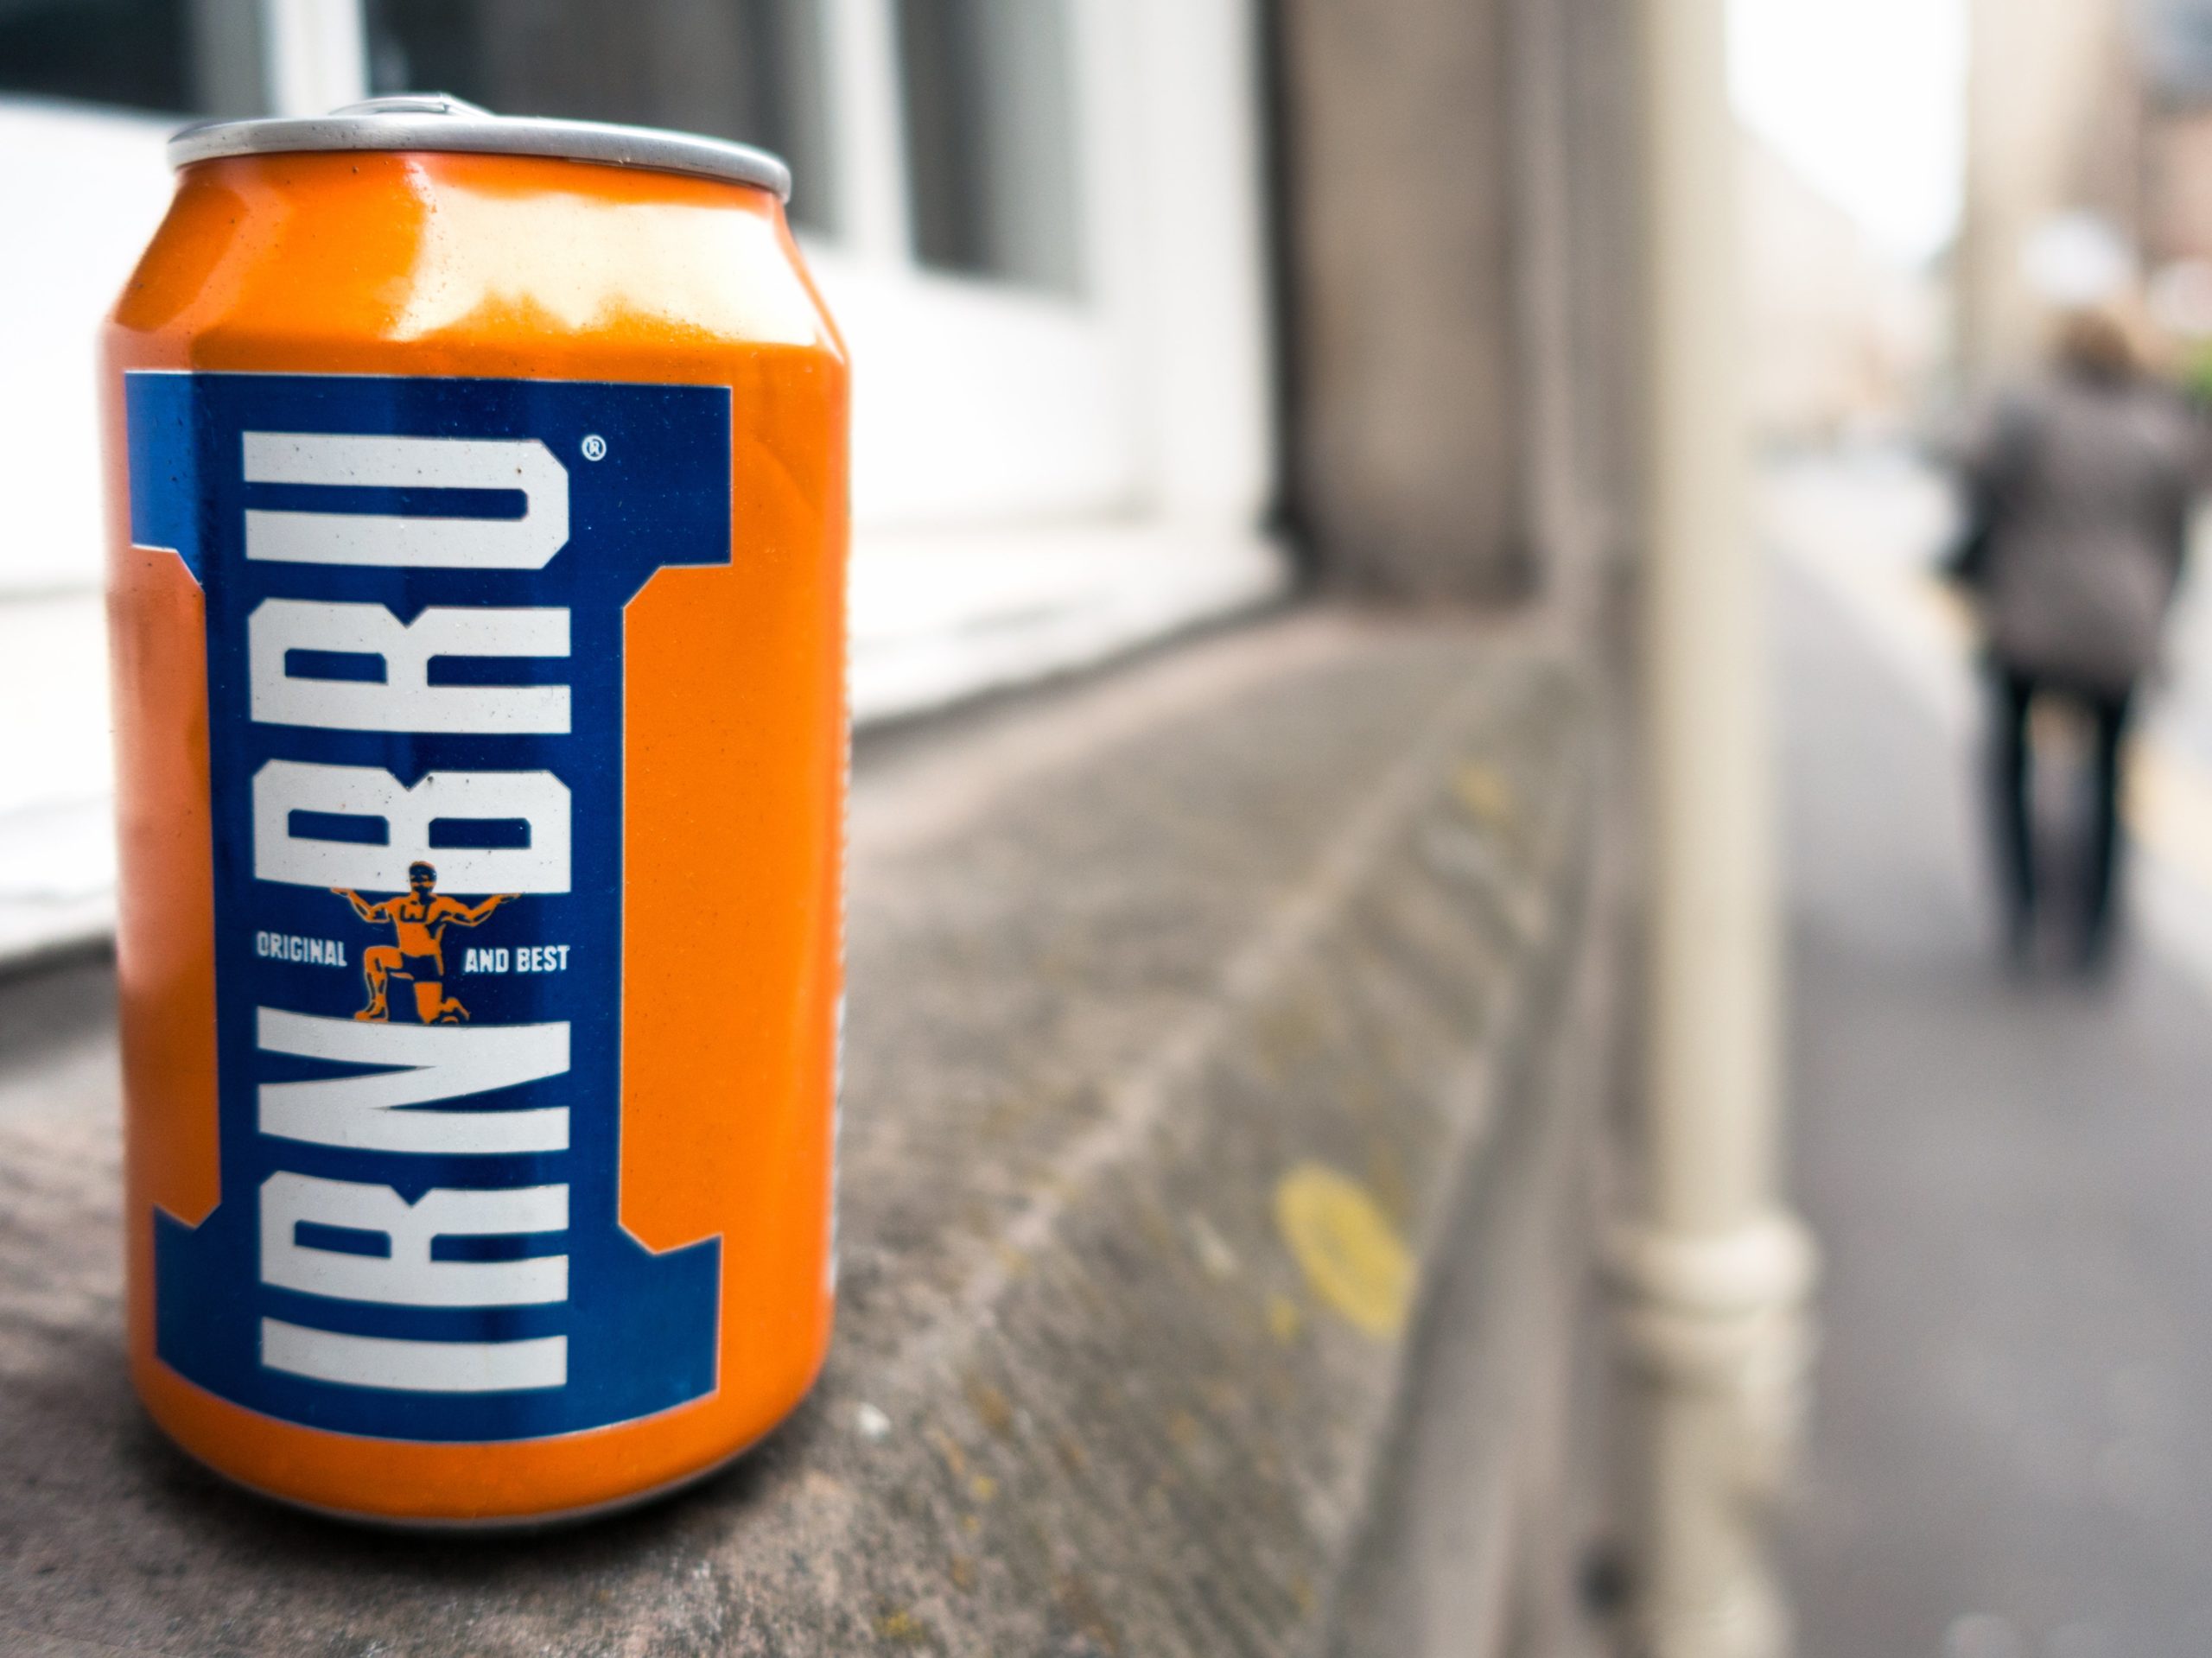 Irn-Bru fans in despair after drink deliveries suffer from HGV driver shortage